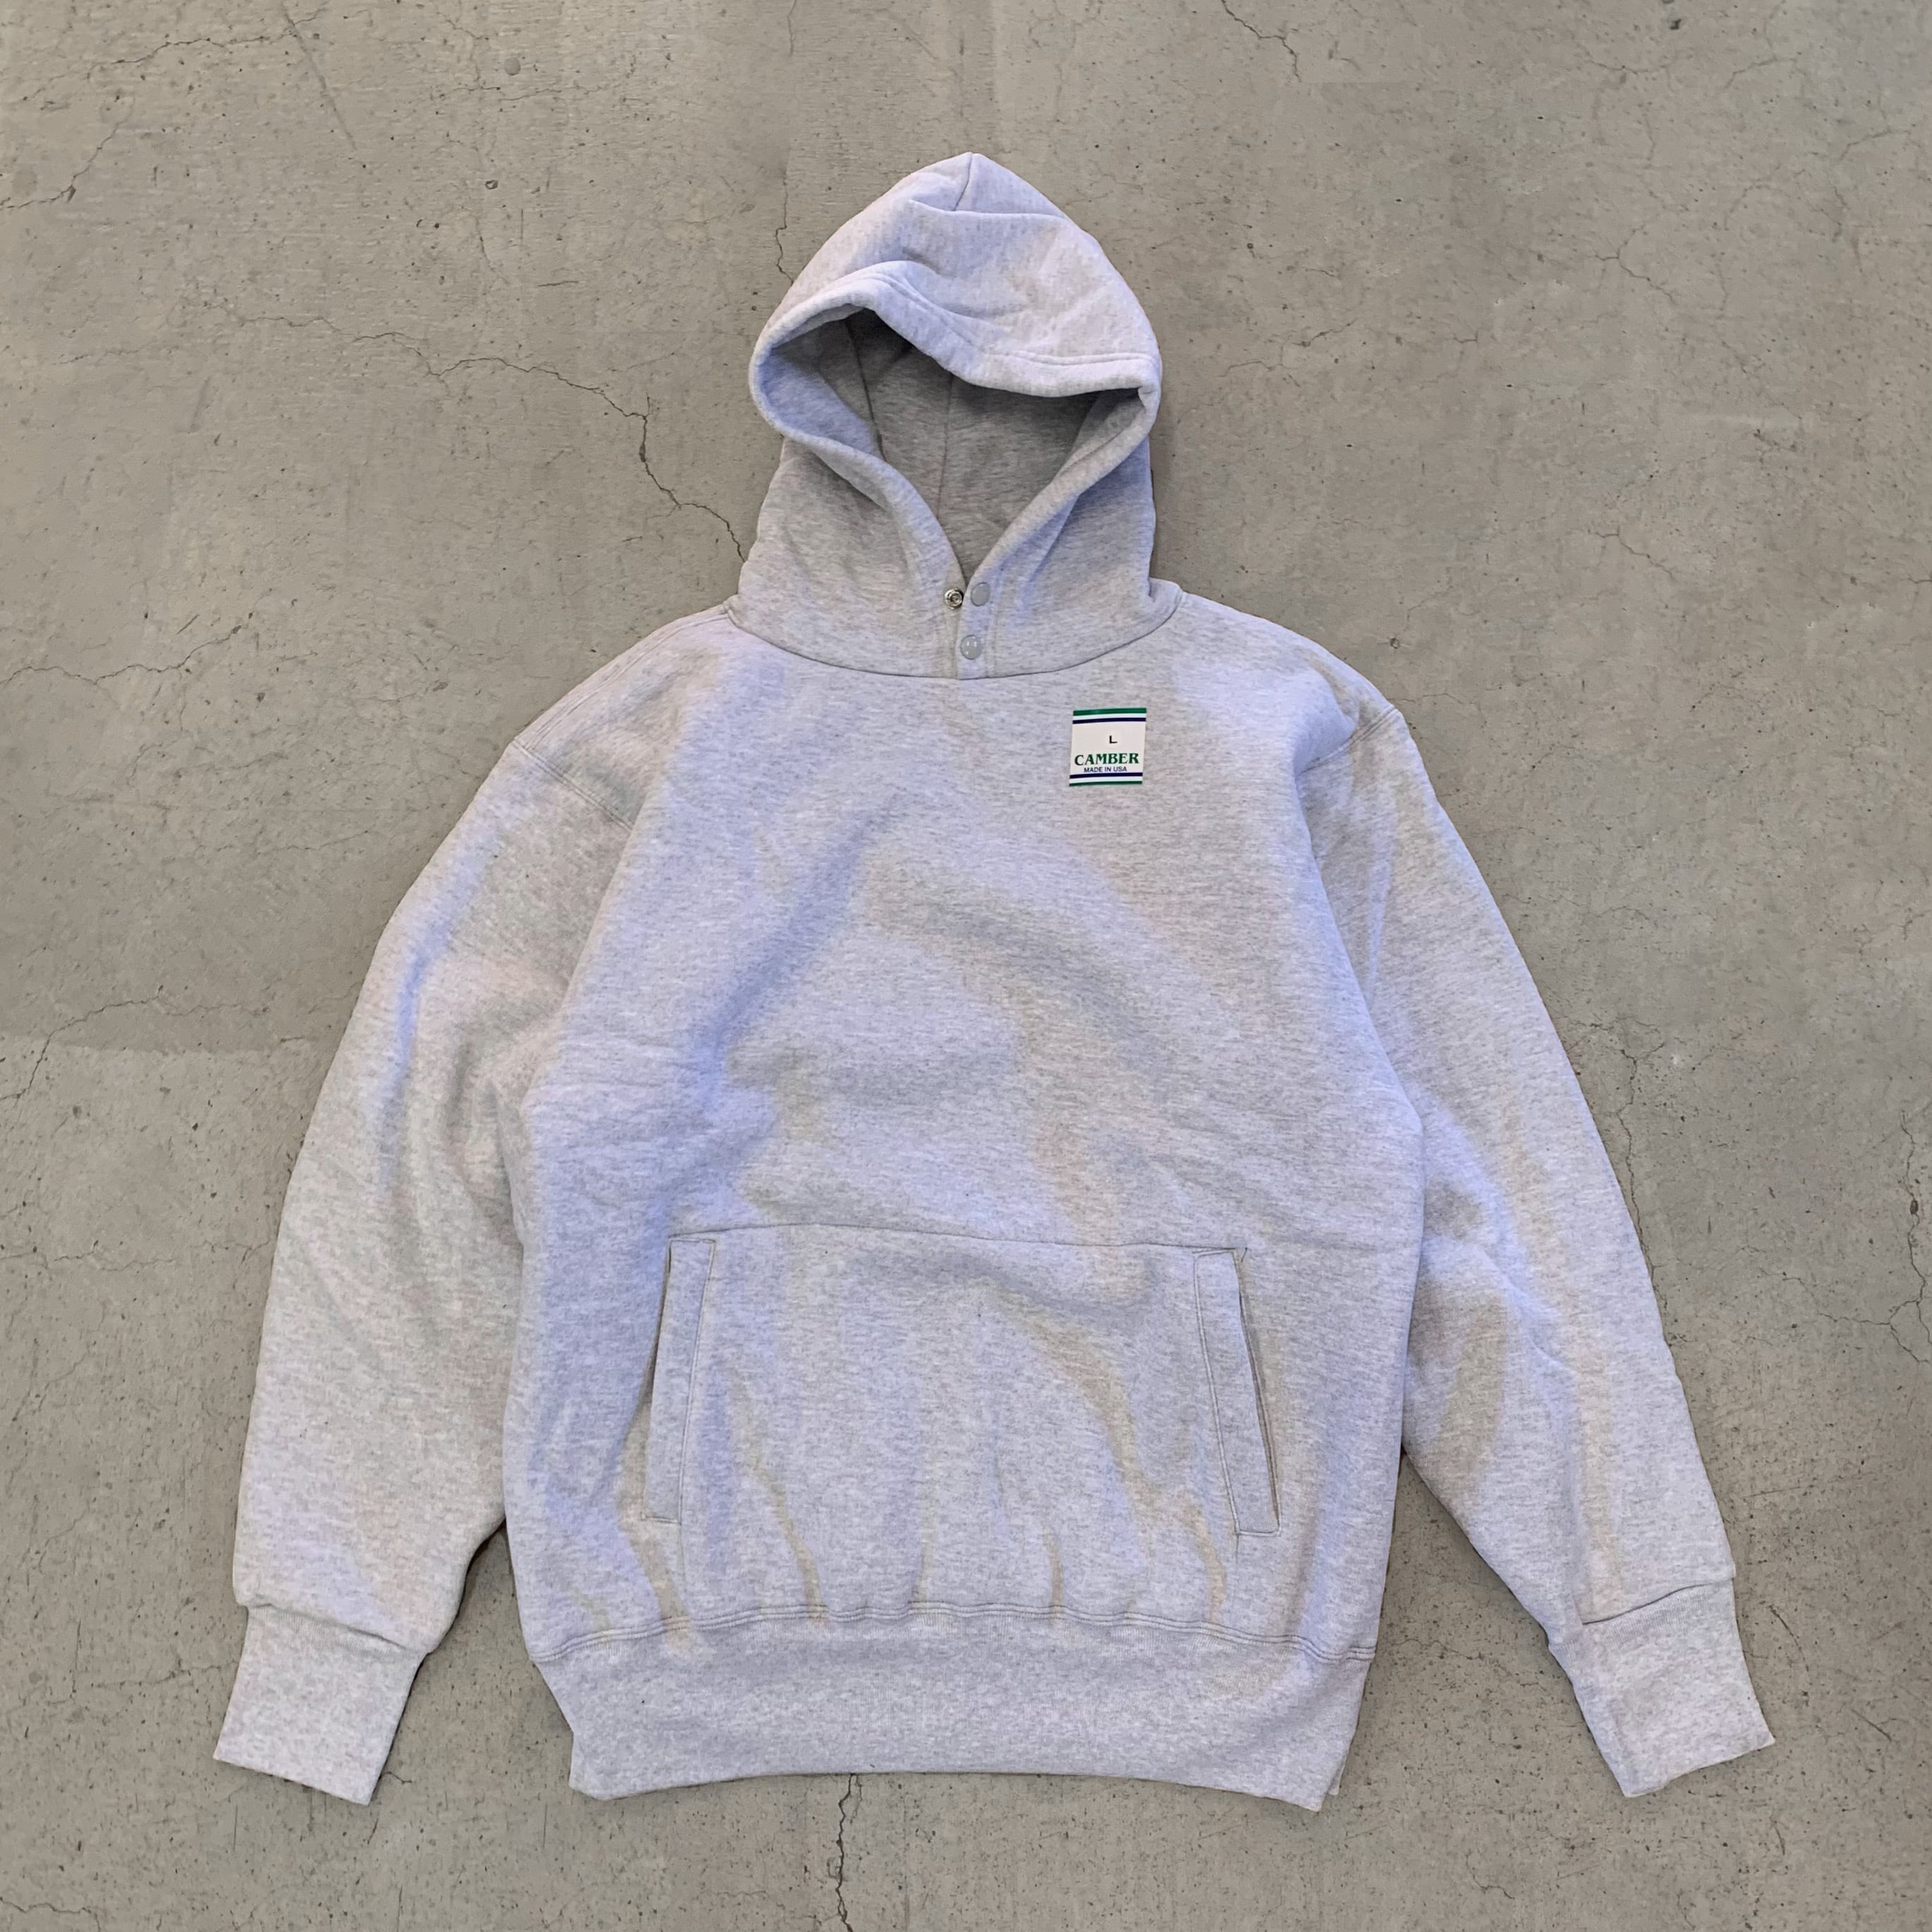 CAMBER / DOUBLE THICK PULLOVER HOODED | WhiteHeadEagle